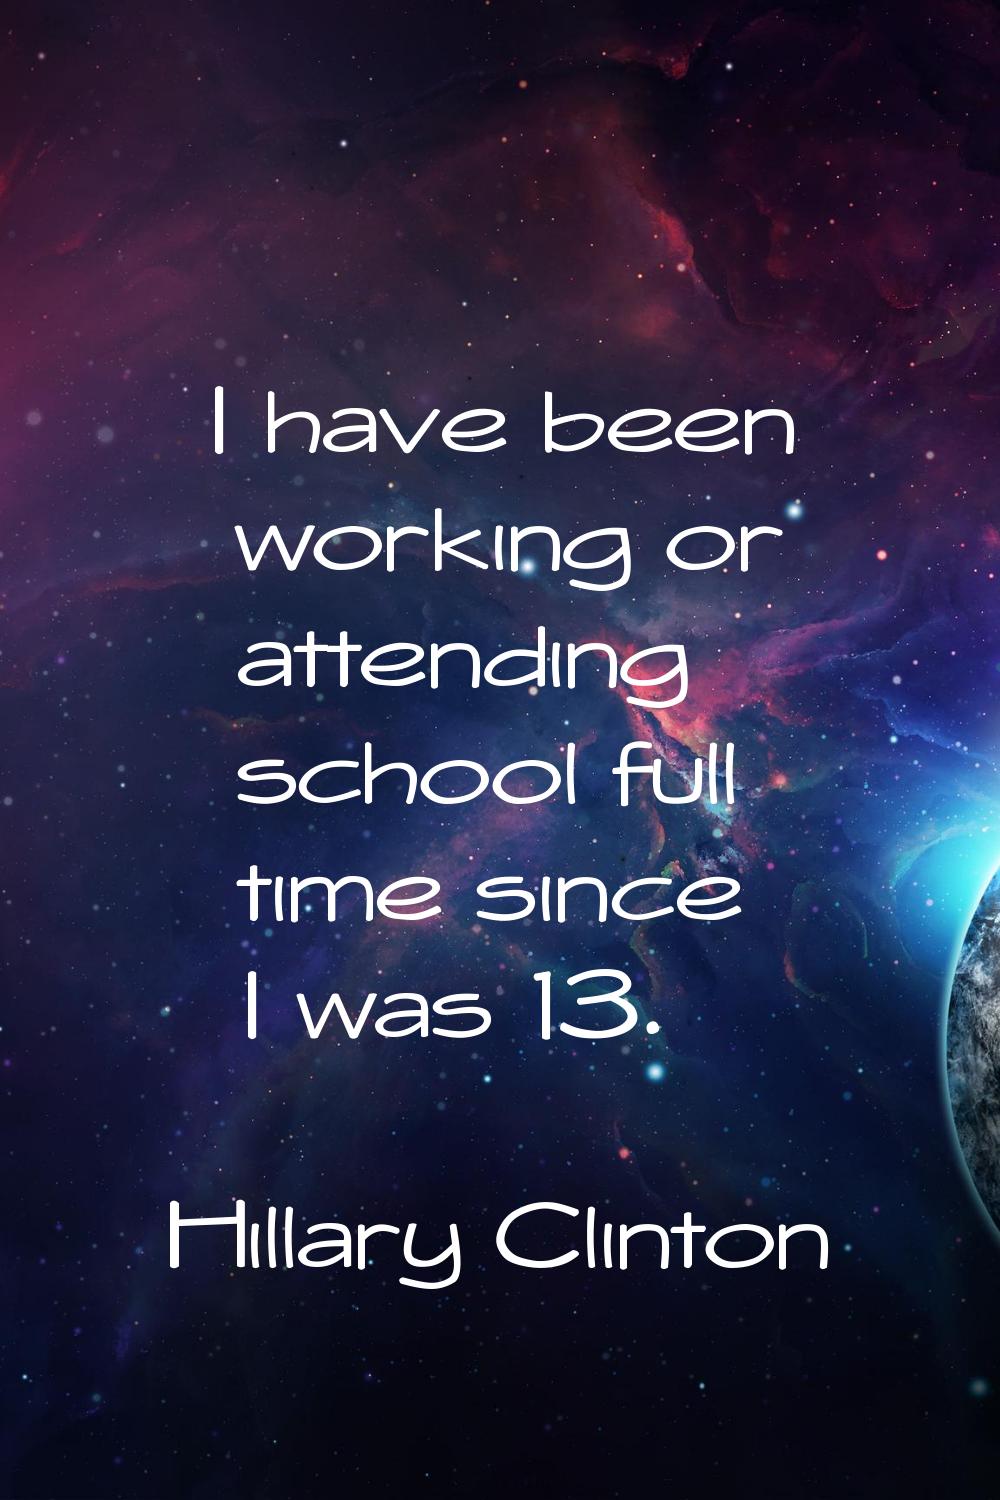 I have been working or attending school full time since I was 13.